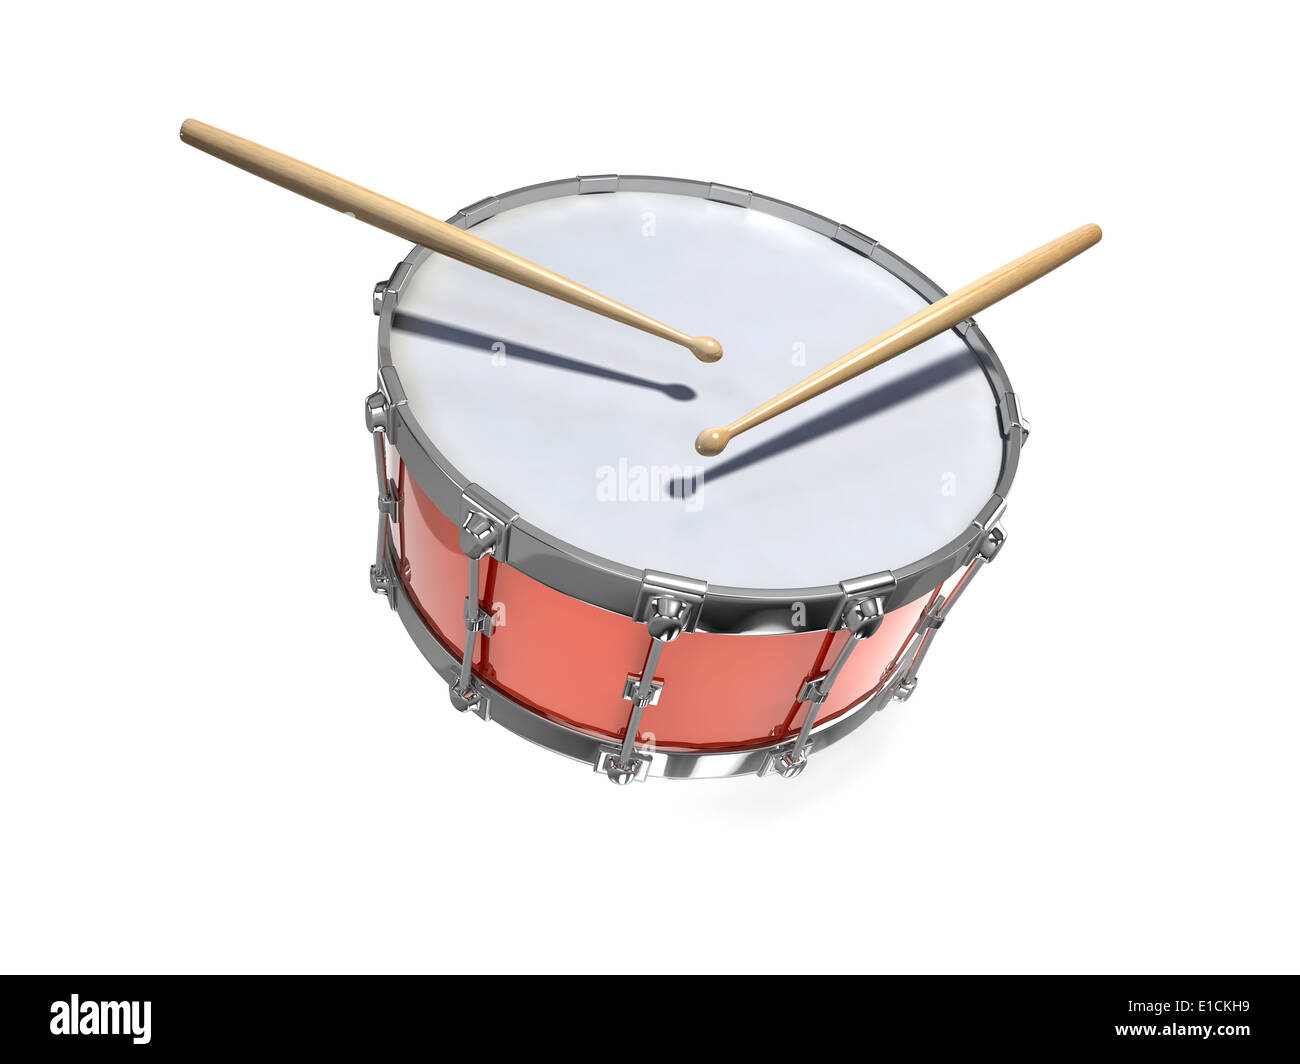 Drumsticks And Drum Stock Photos & Drumsticks And Drum Stock ...